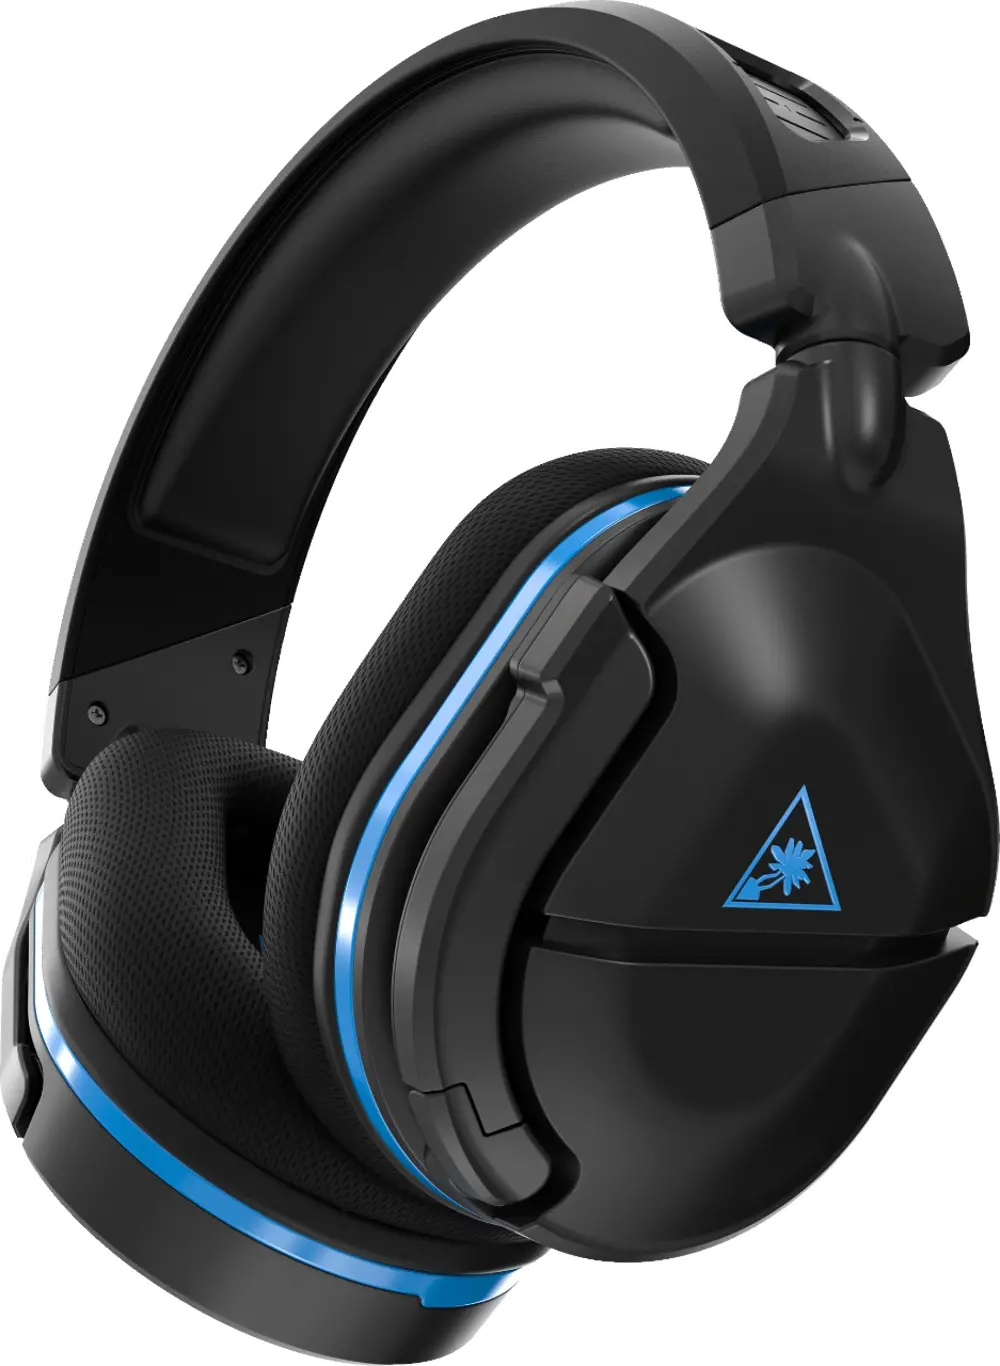 TBS/STEALTH_600-2PSB Turtle Beach Stealth 600 Gen 2 Black Wireless Gaming Headset - PS4, PS5-1